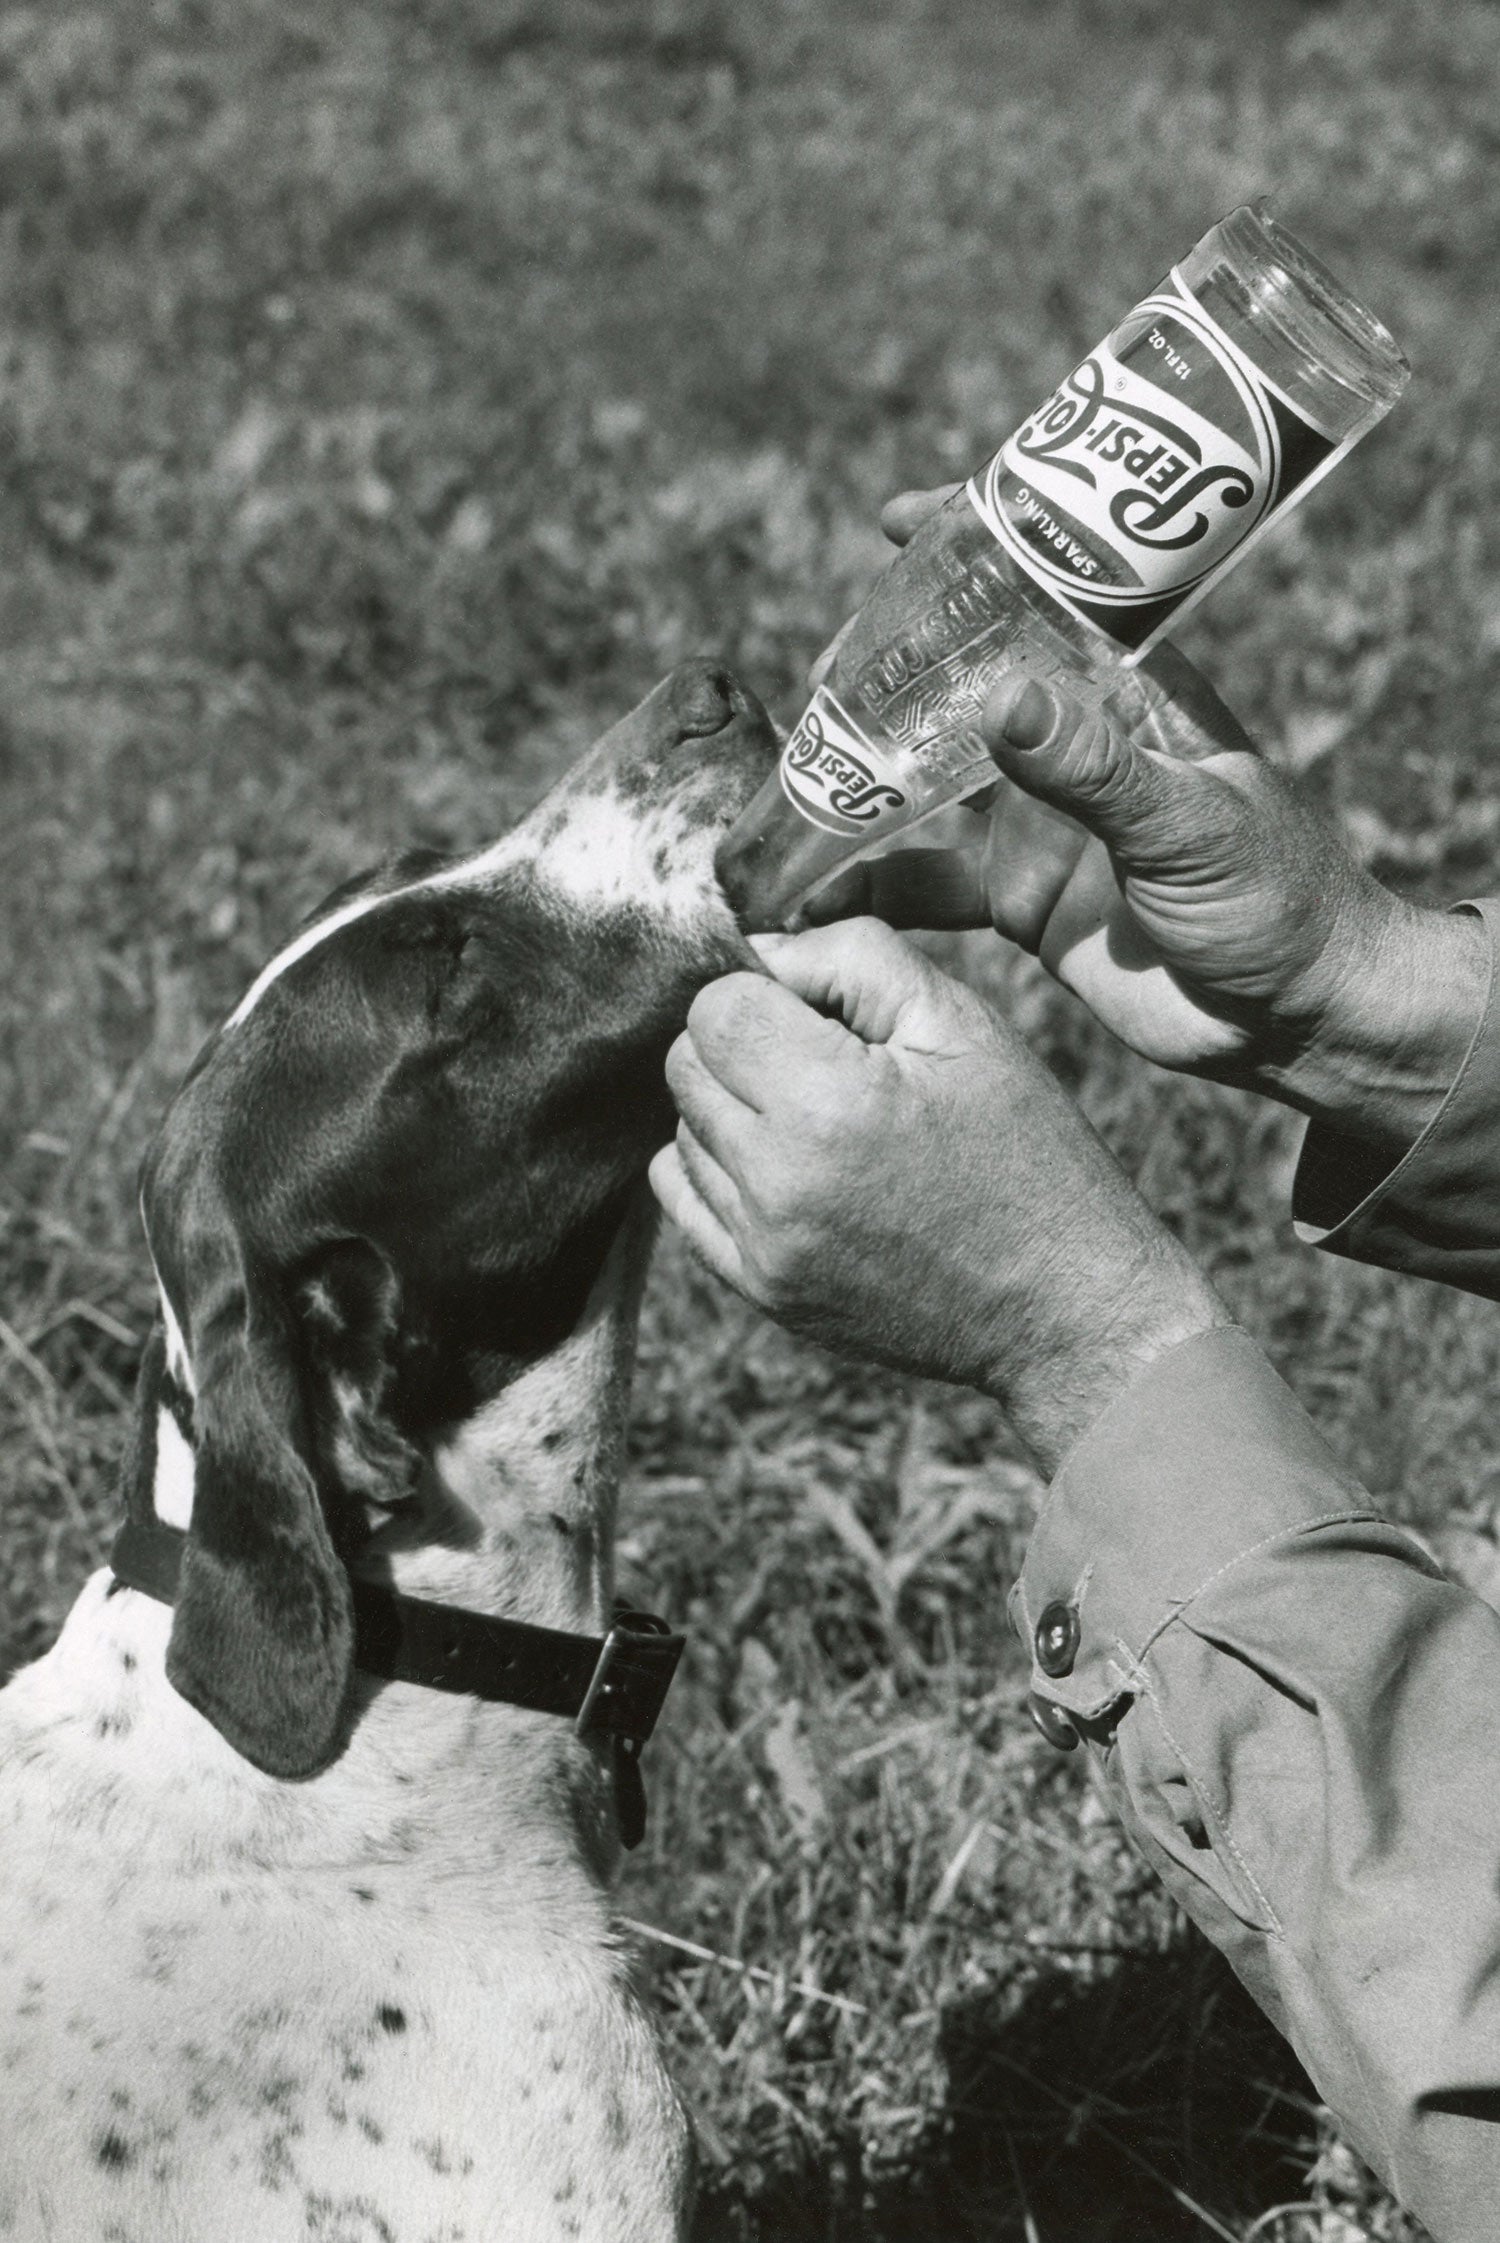 Dog drinking out of a soda bottle